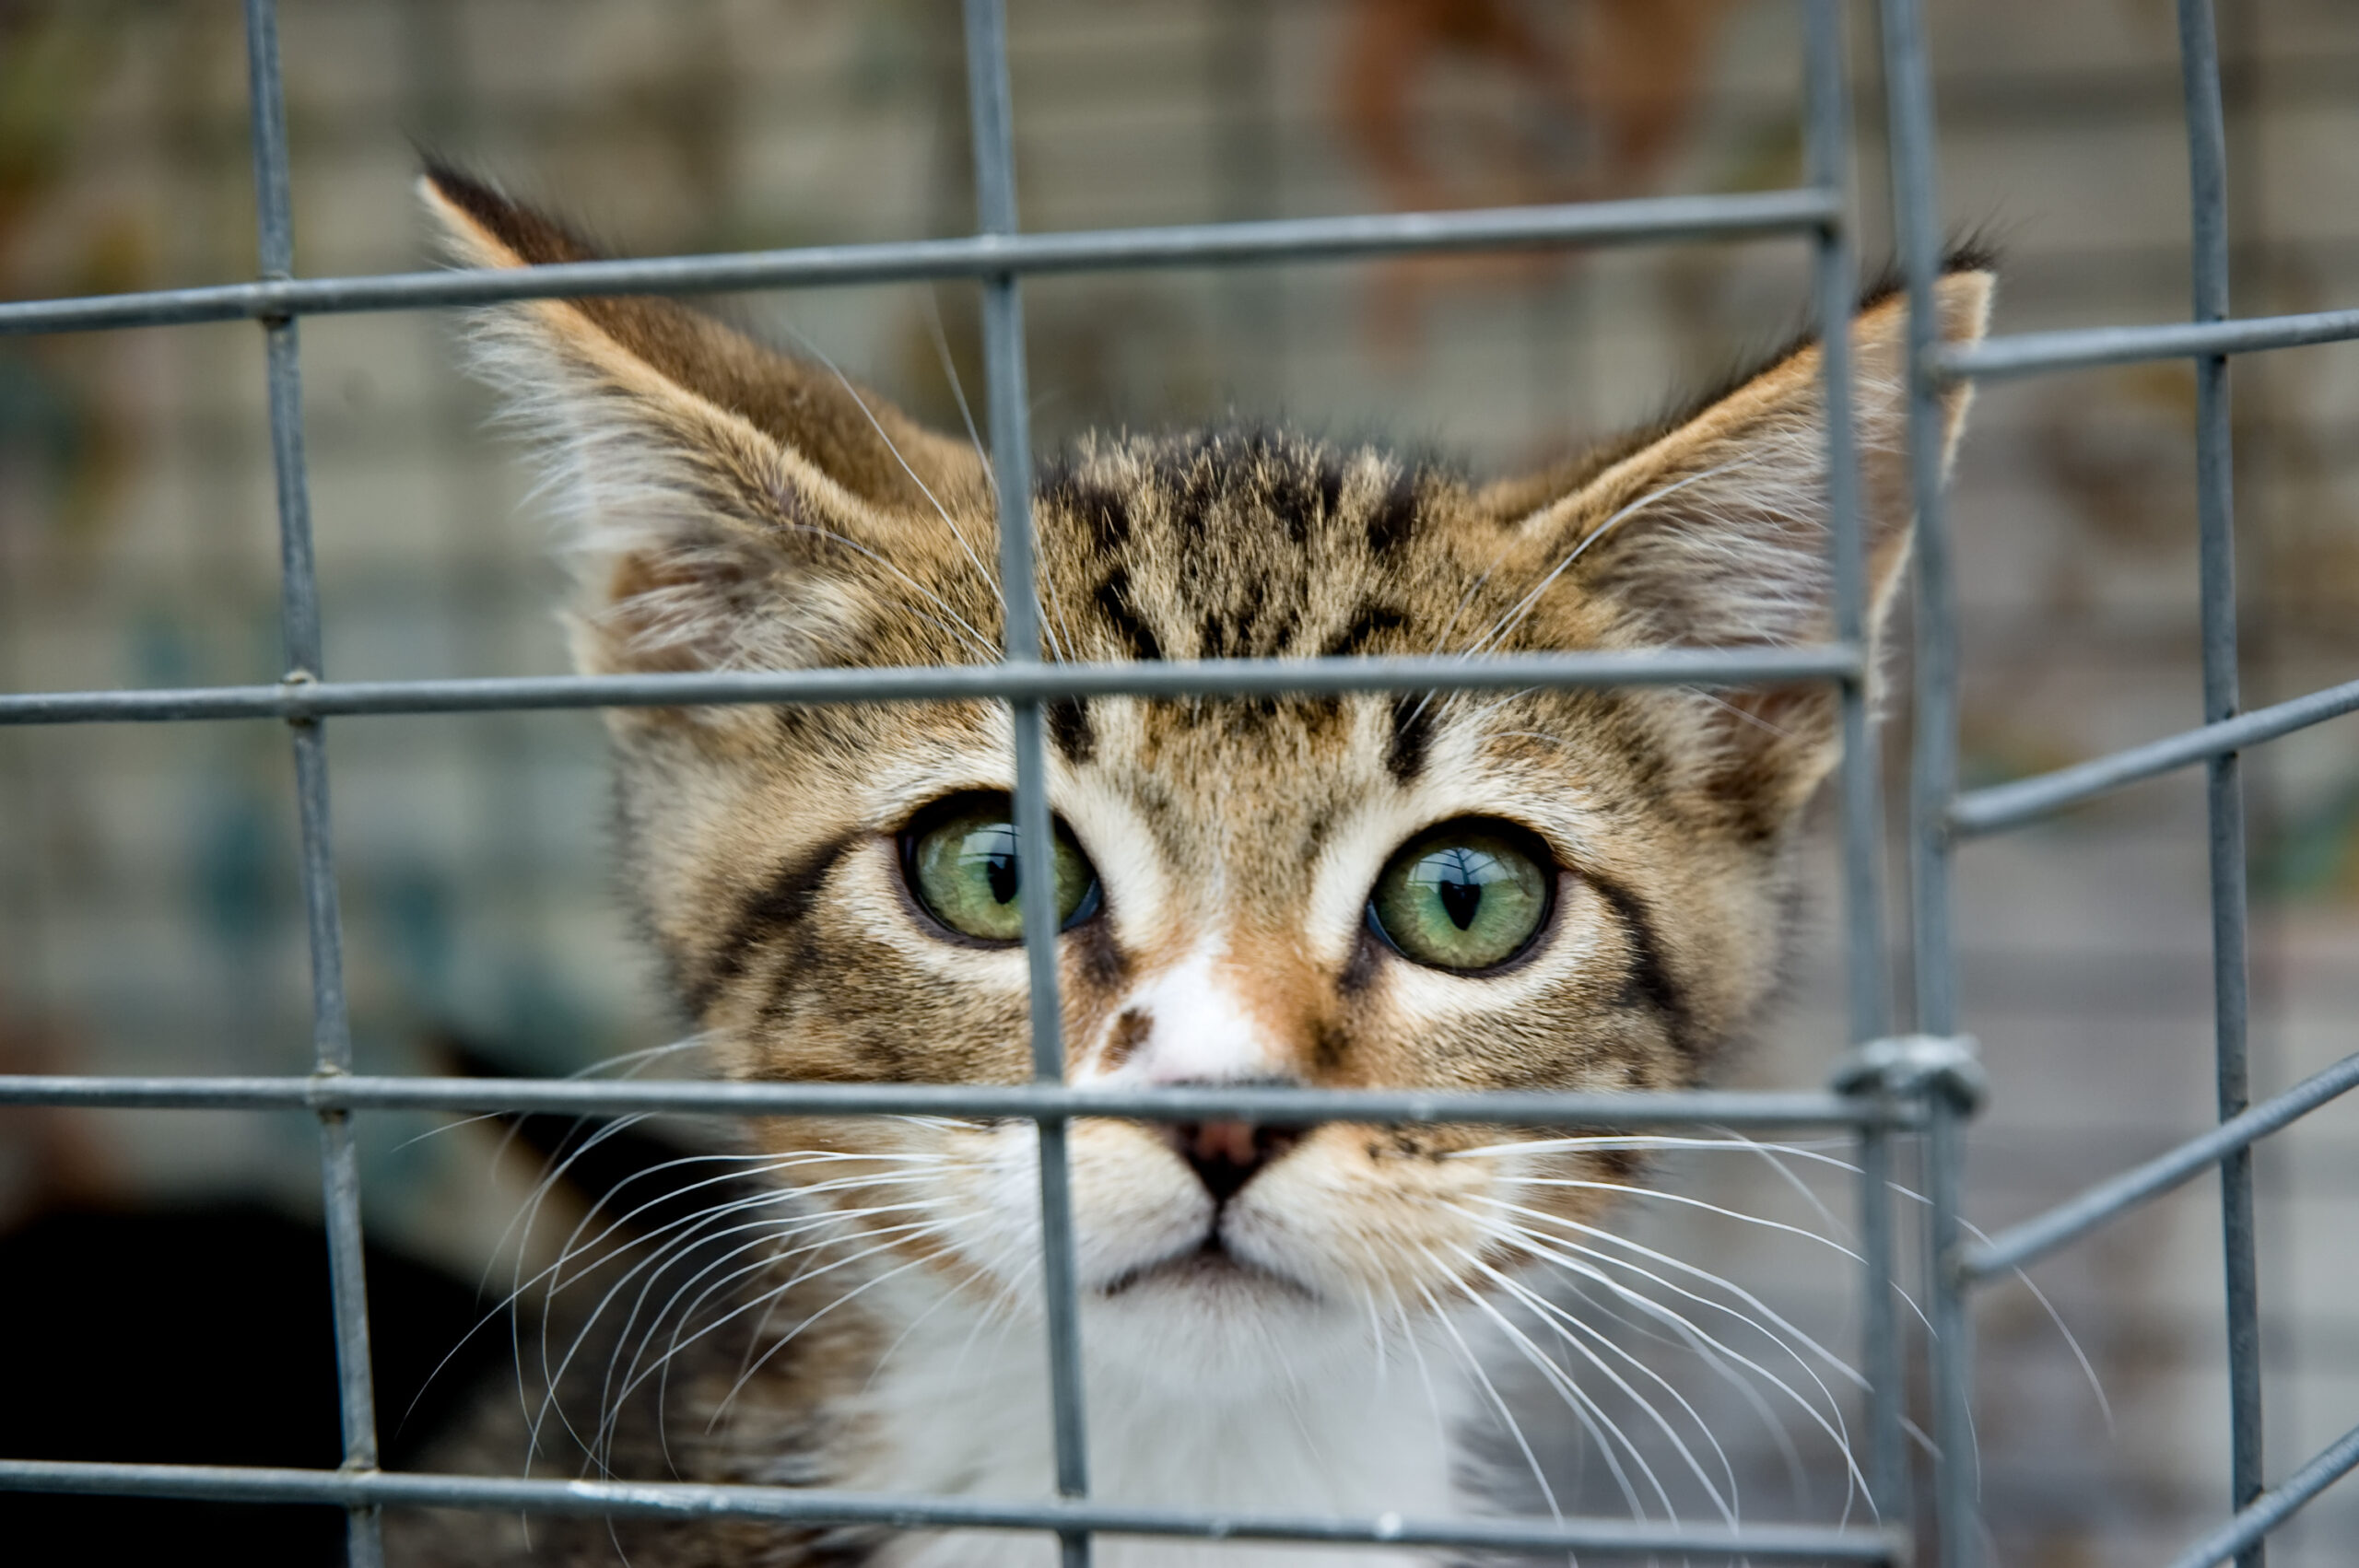 A frightened kitten with green eyes staring out from a cage